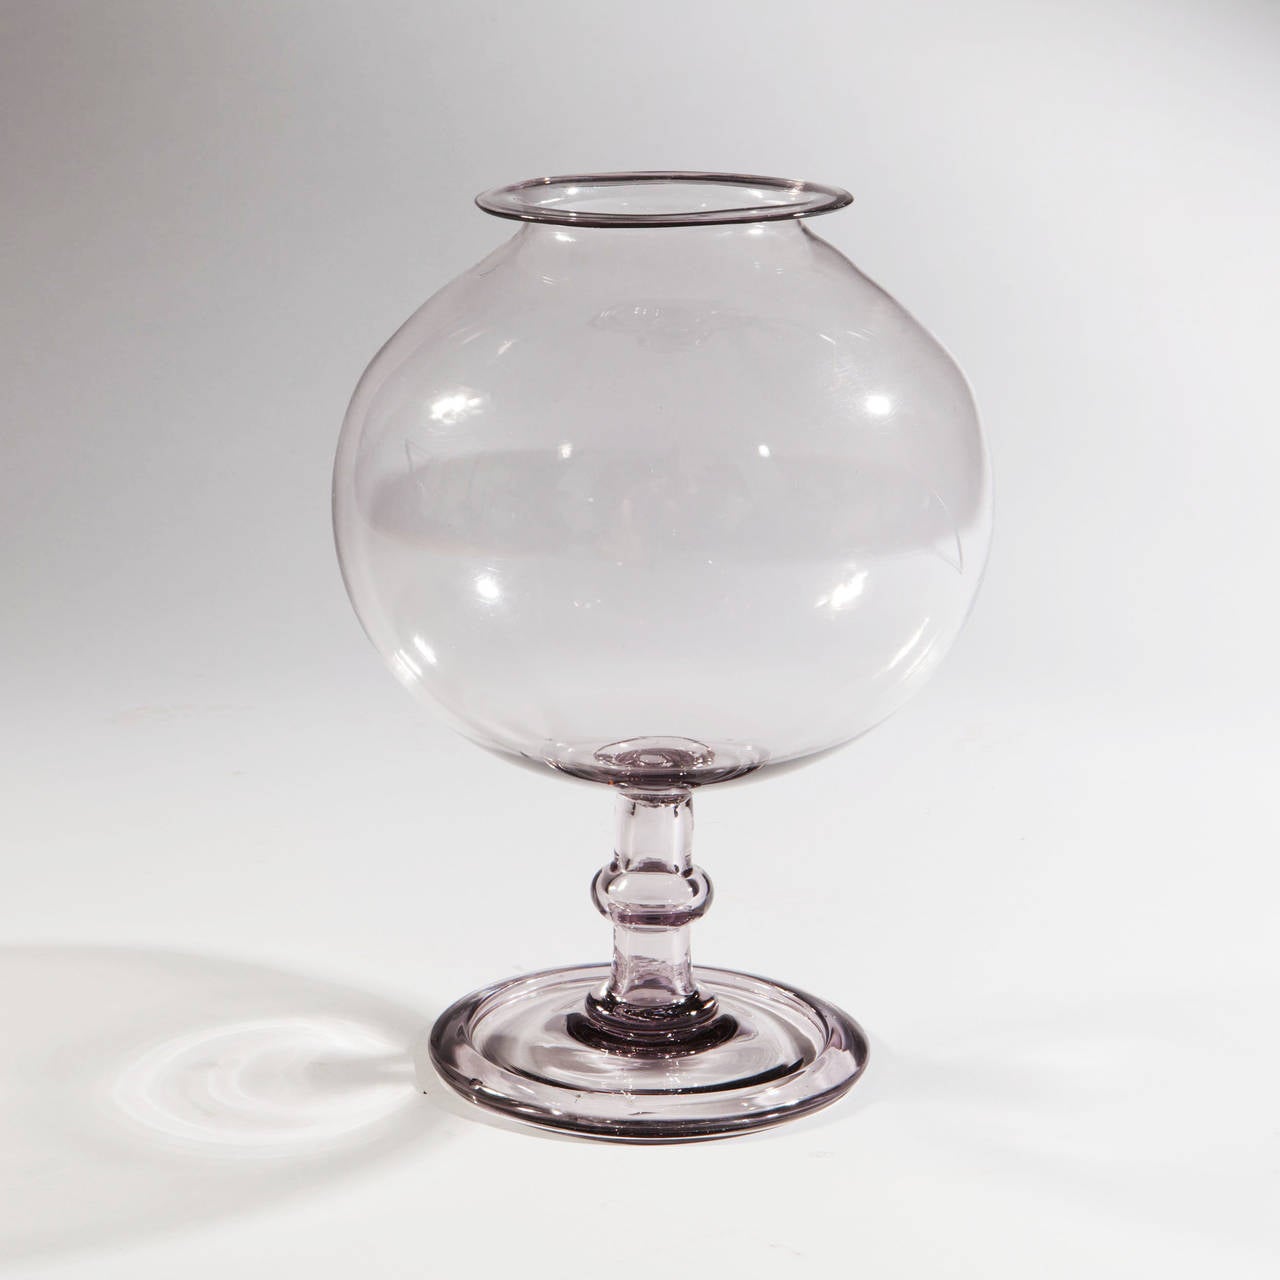 A rare mid-18th century glass fish bowl of large scale supported on a wide circular foot